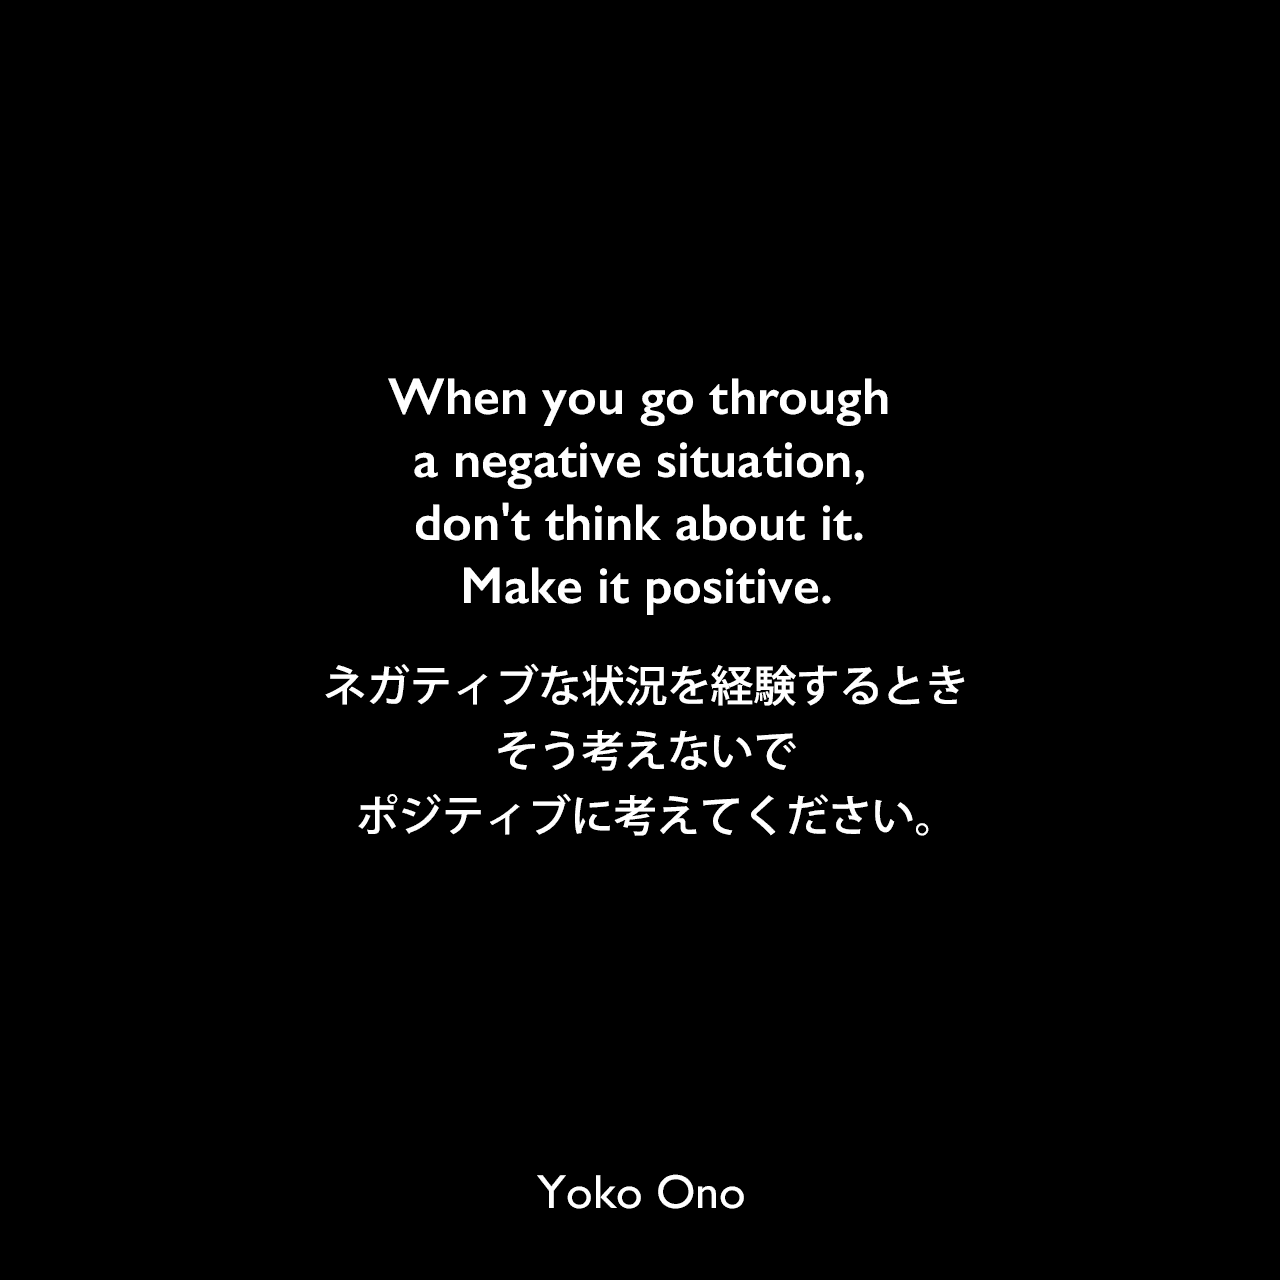 When you go through a negative situation, don't think about it. Make it positive.ネガティブな状況を経験するとき、そう考えないで、ポジティブに考えてください。Yoko Ono